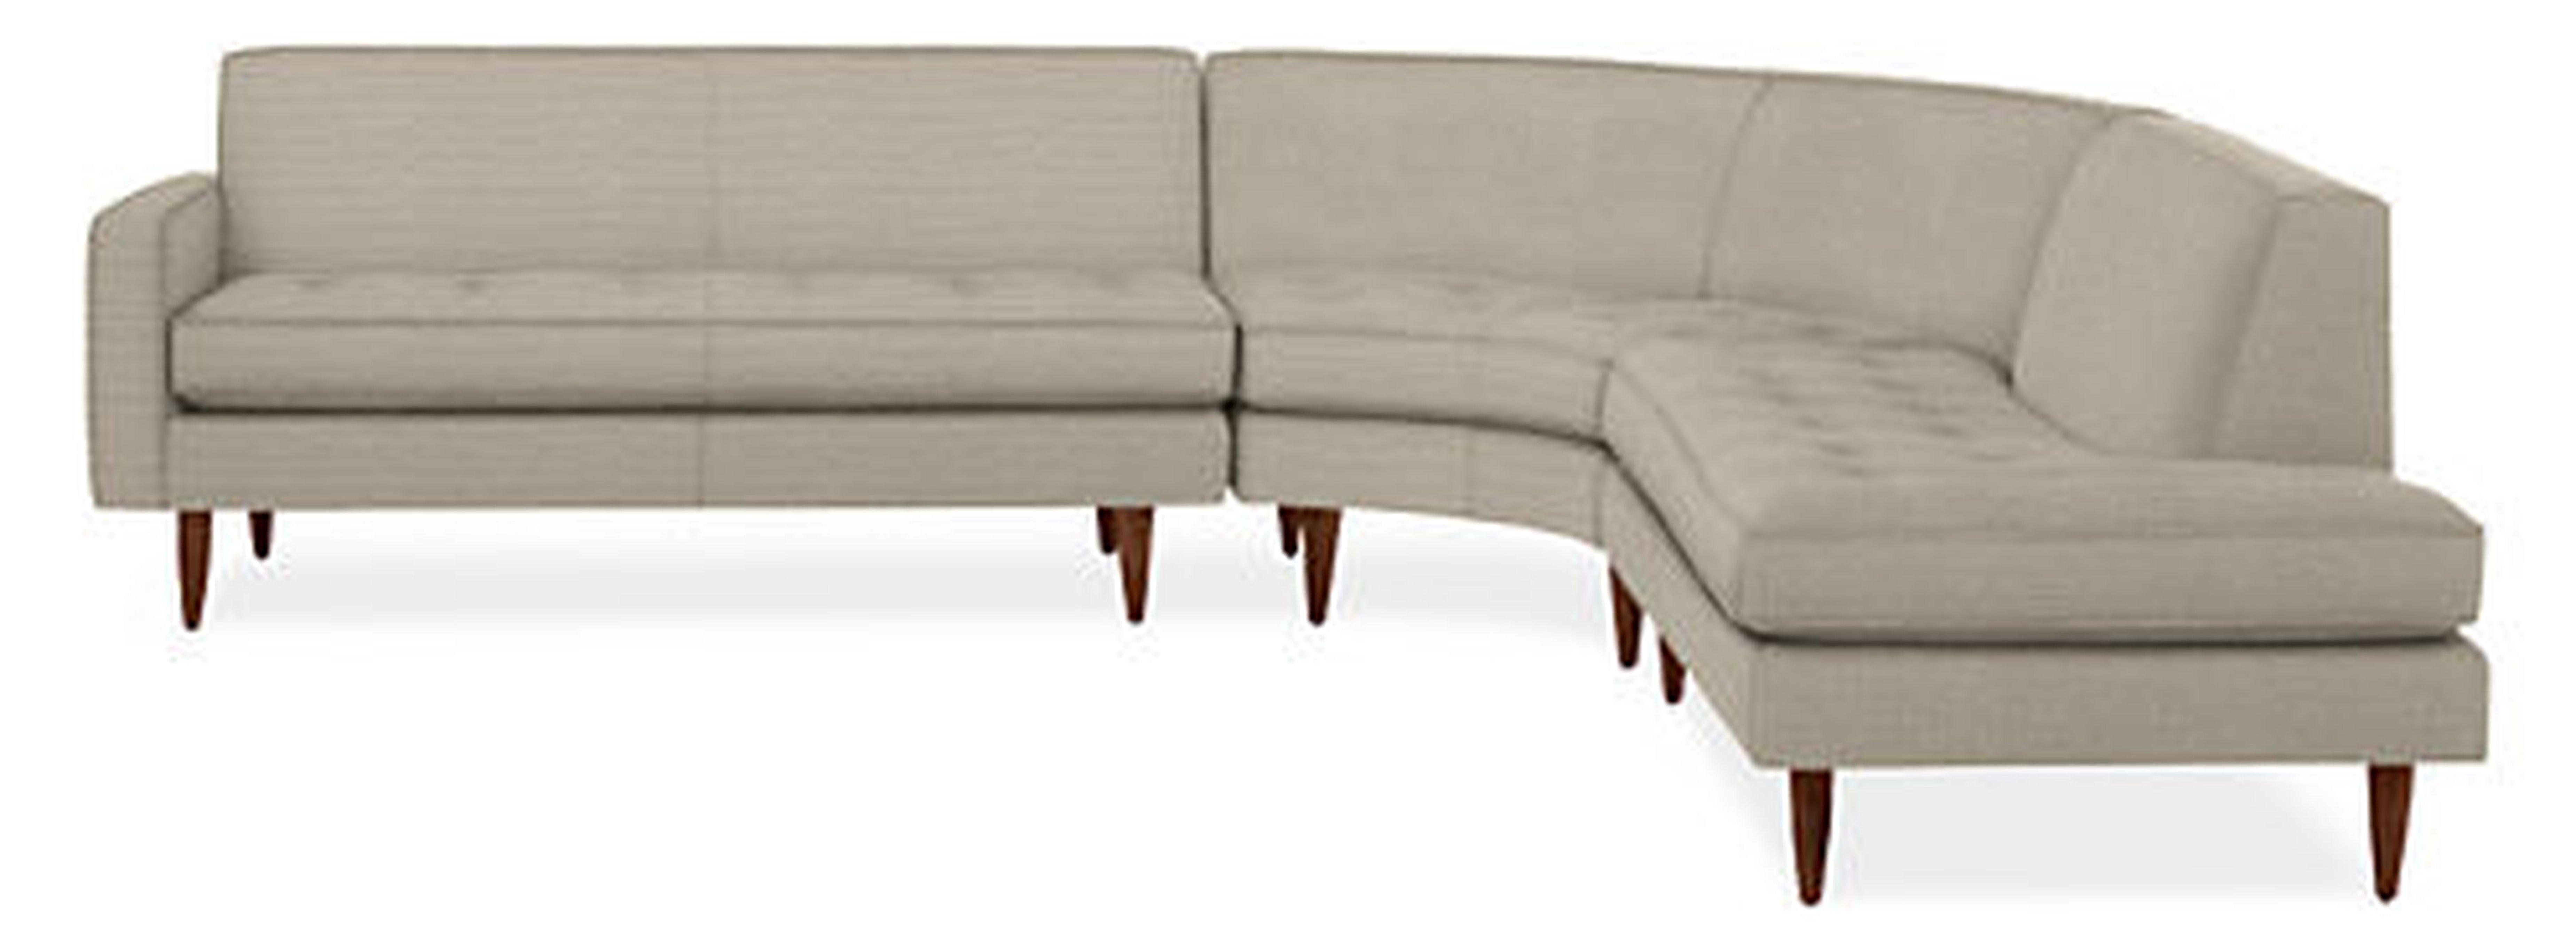 Reese Custom 115x114" Three-Piece Curved Sectional w/Left-Back Sofa in Declan Natural Fabric - Room & Board